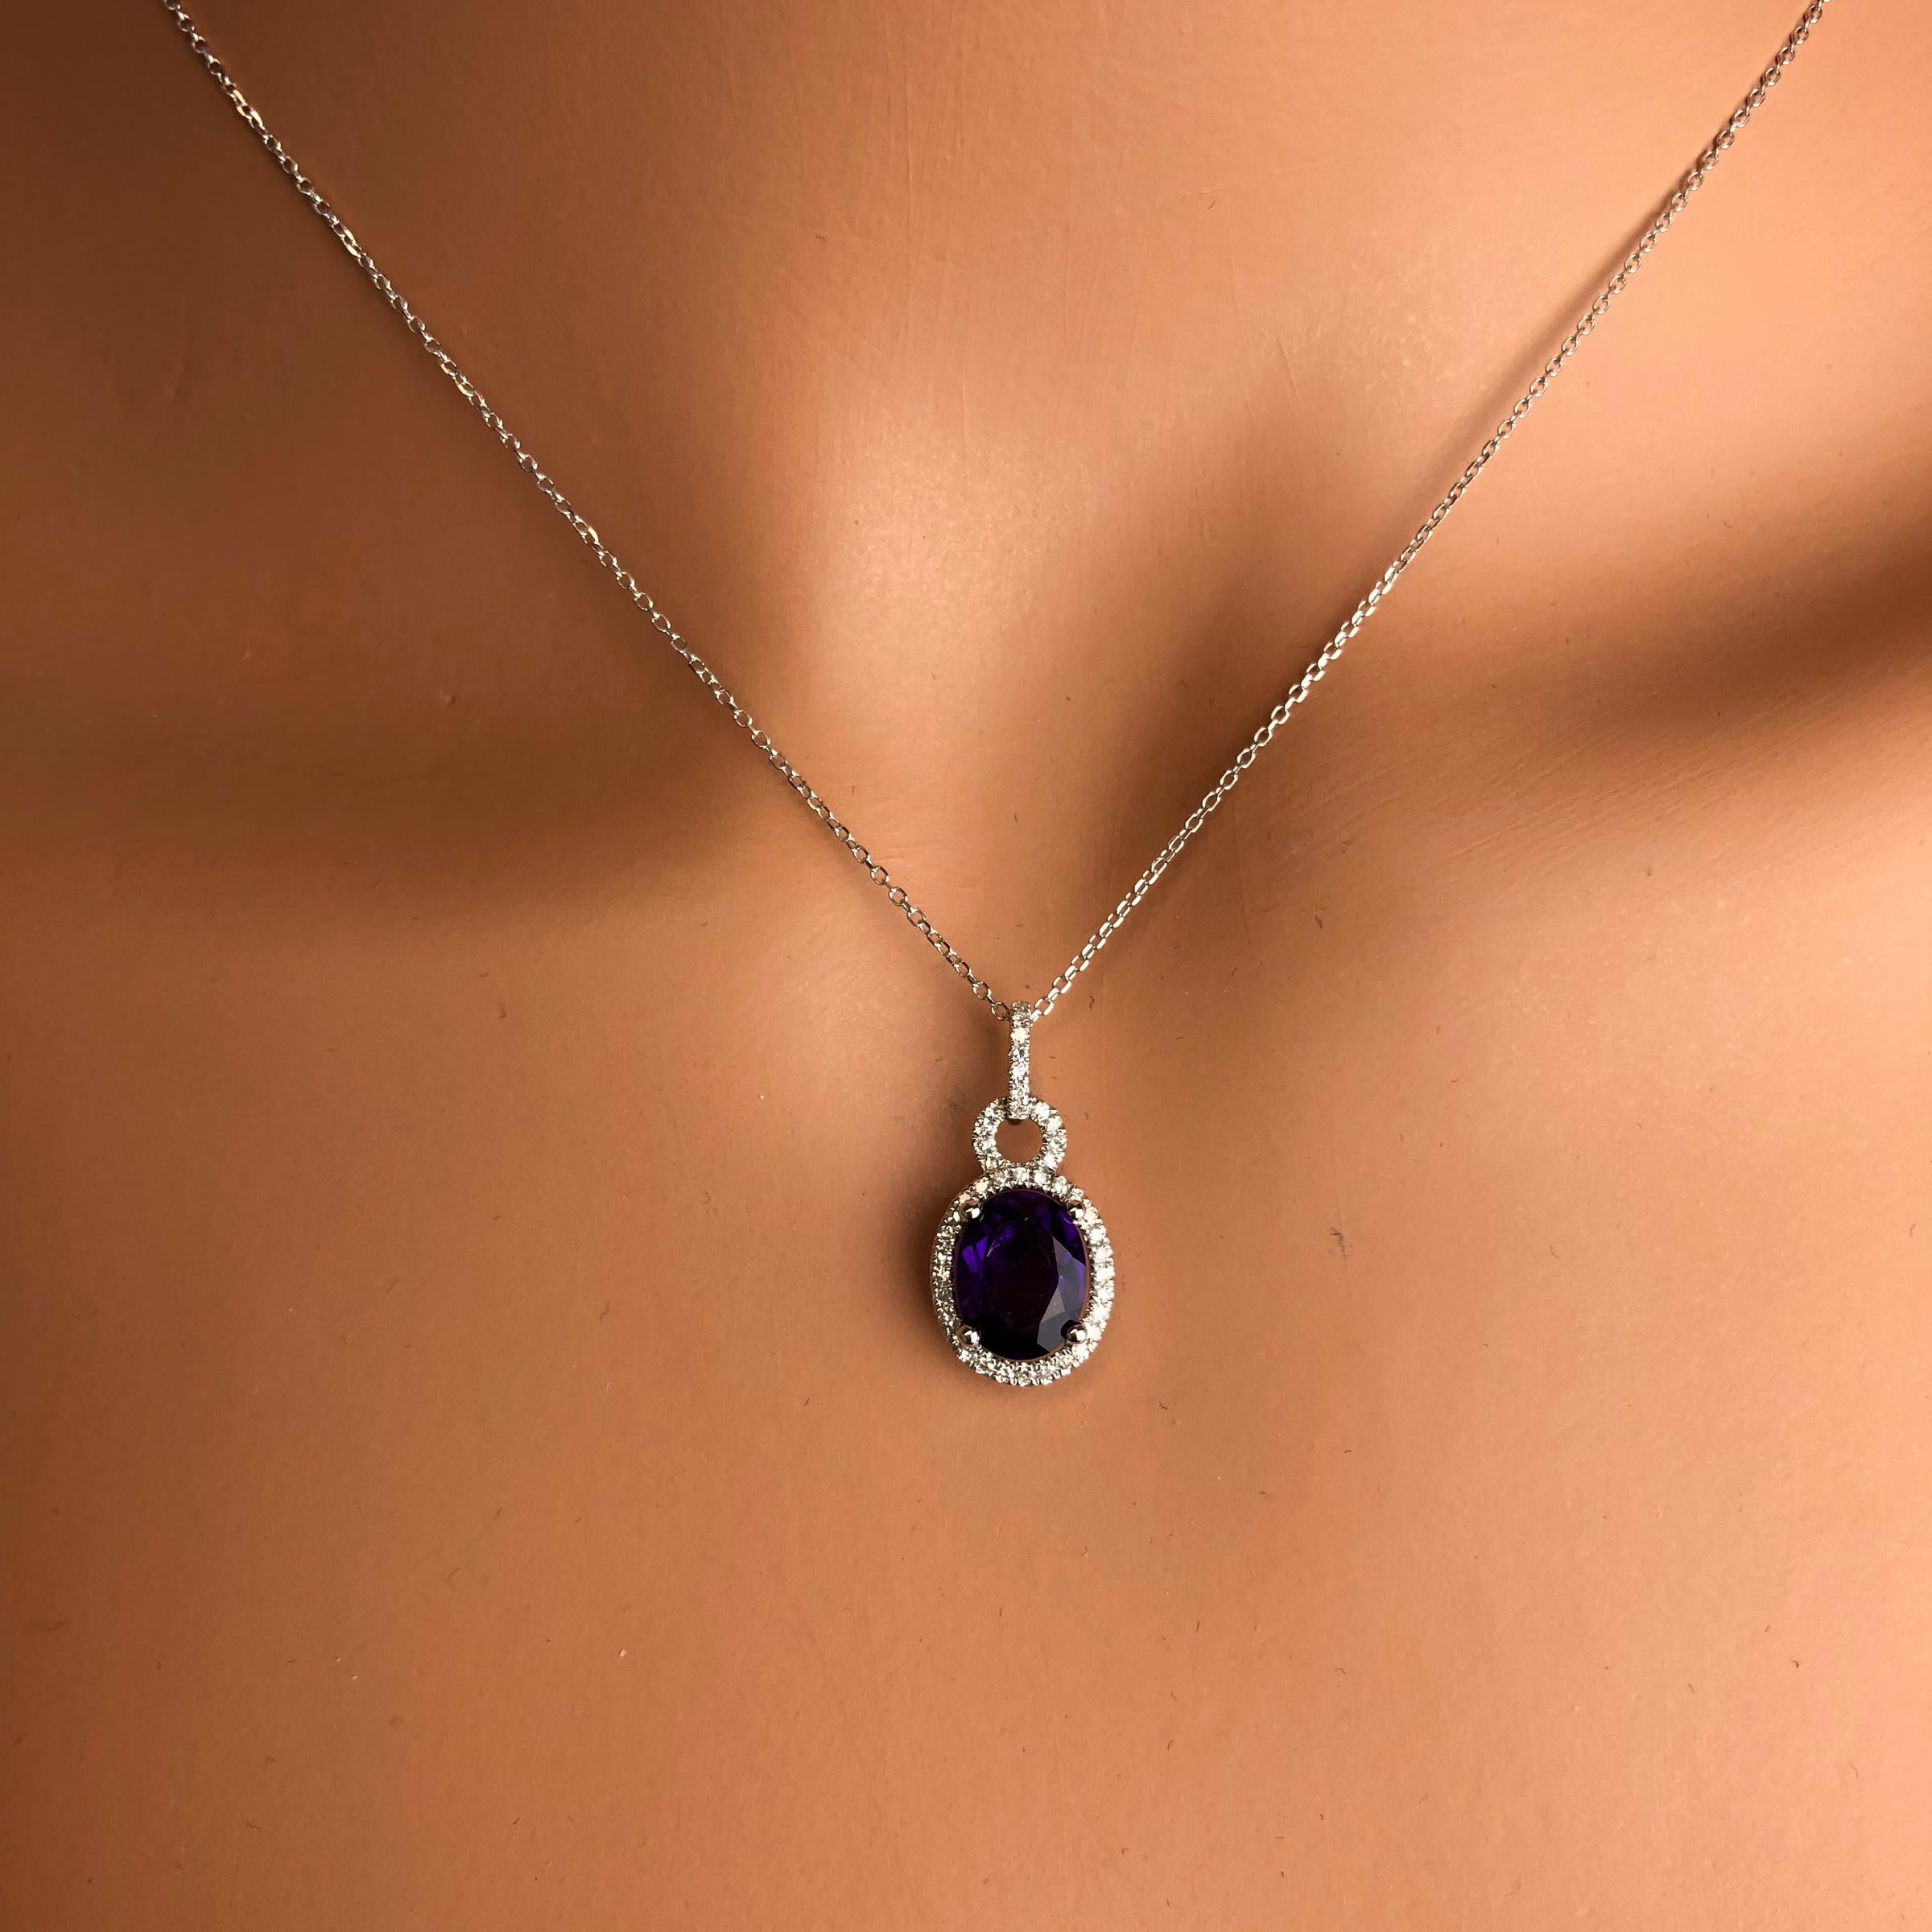 This lovely halo pendant features 1.83 carats oval cut fine Amethyst, surrounded by a halo of round white diamonds, with additional diamonds decorating the bail.

Center: 1.83 carats fine Amethyst
Diamond Halo and Bail: 43 round diamonds total 0.16